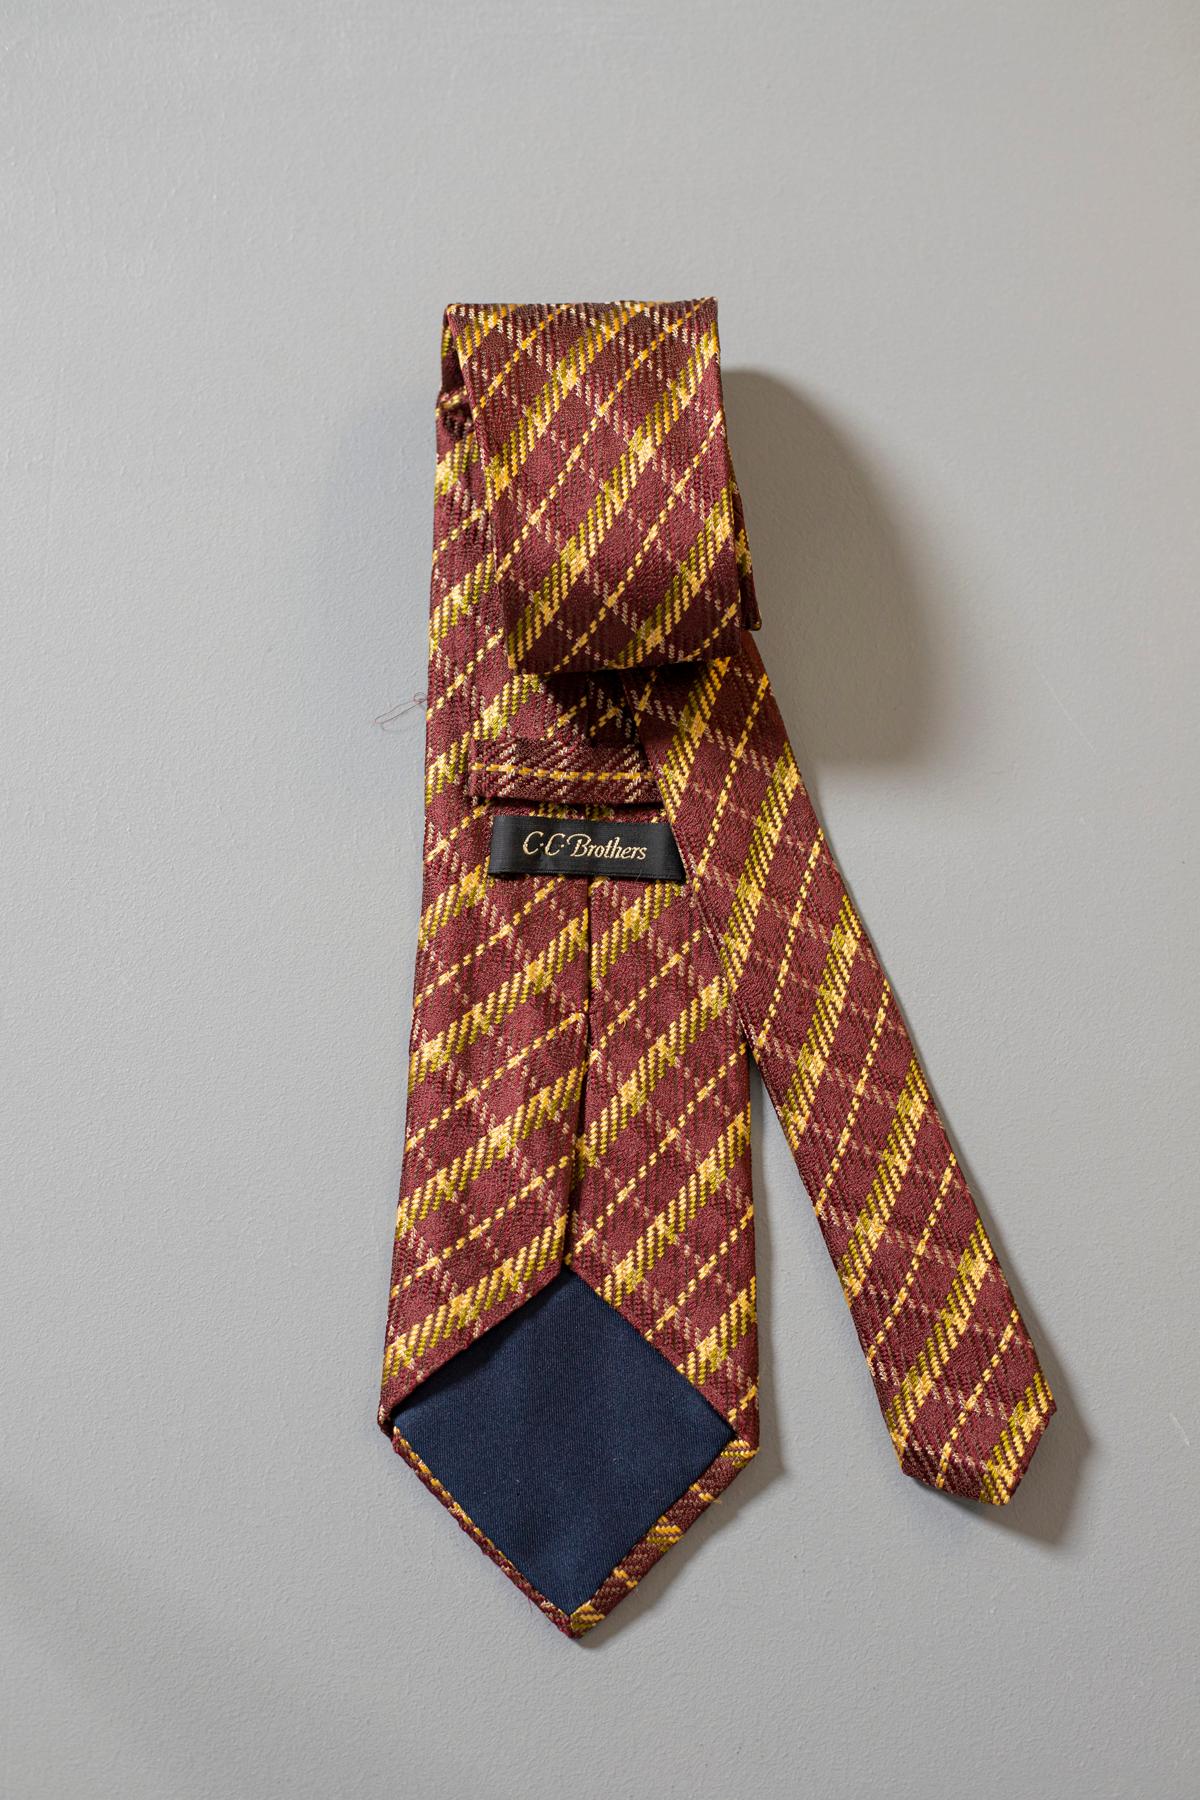 Vintage C. C. Brothers tie, it is made in 100% silk. Decorated with yellow lines that form rhombuses, the main color is brown, which makes it a predominantly winter tie to combine with a solid color suit or even more sporty clothing. 